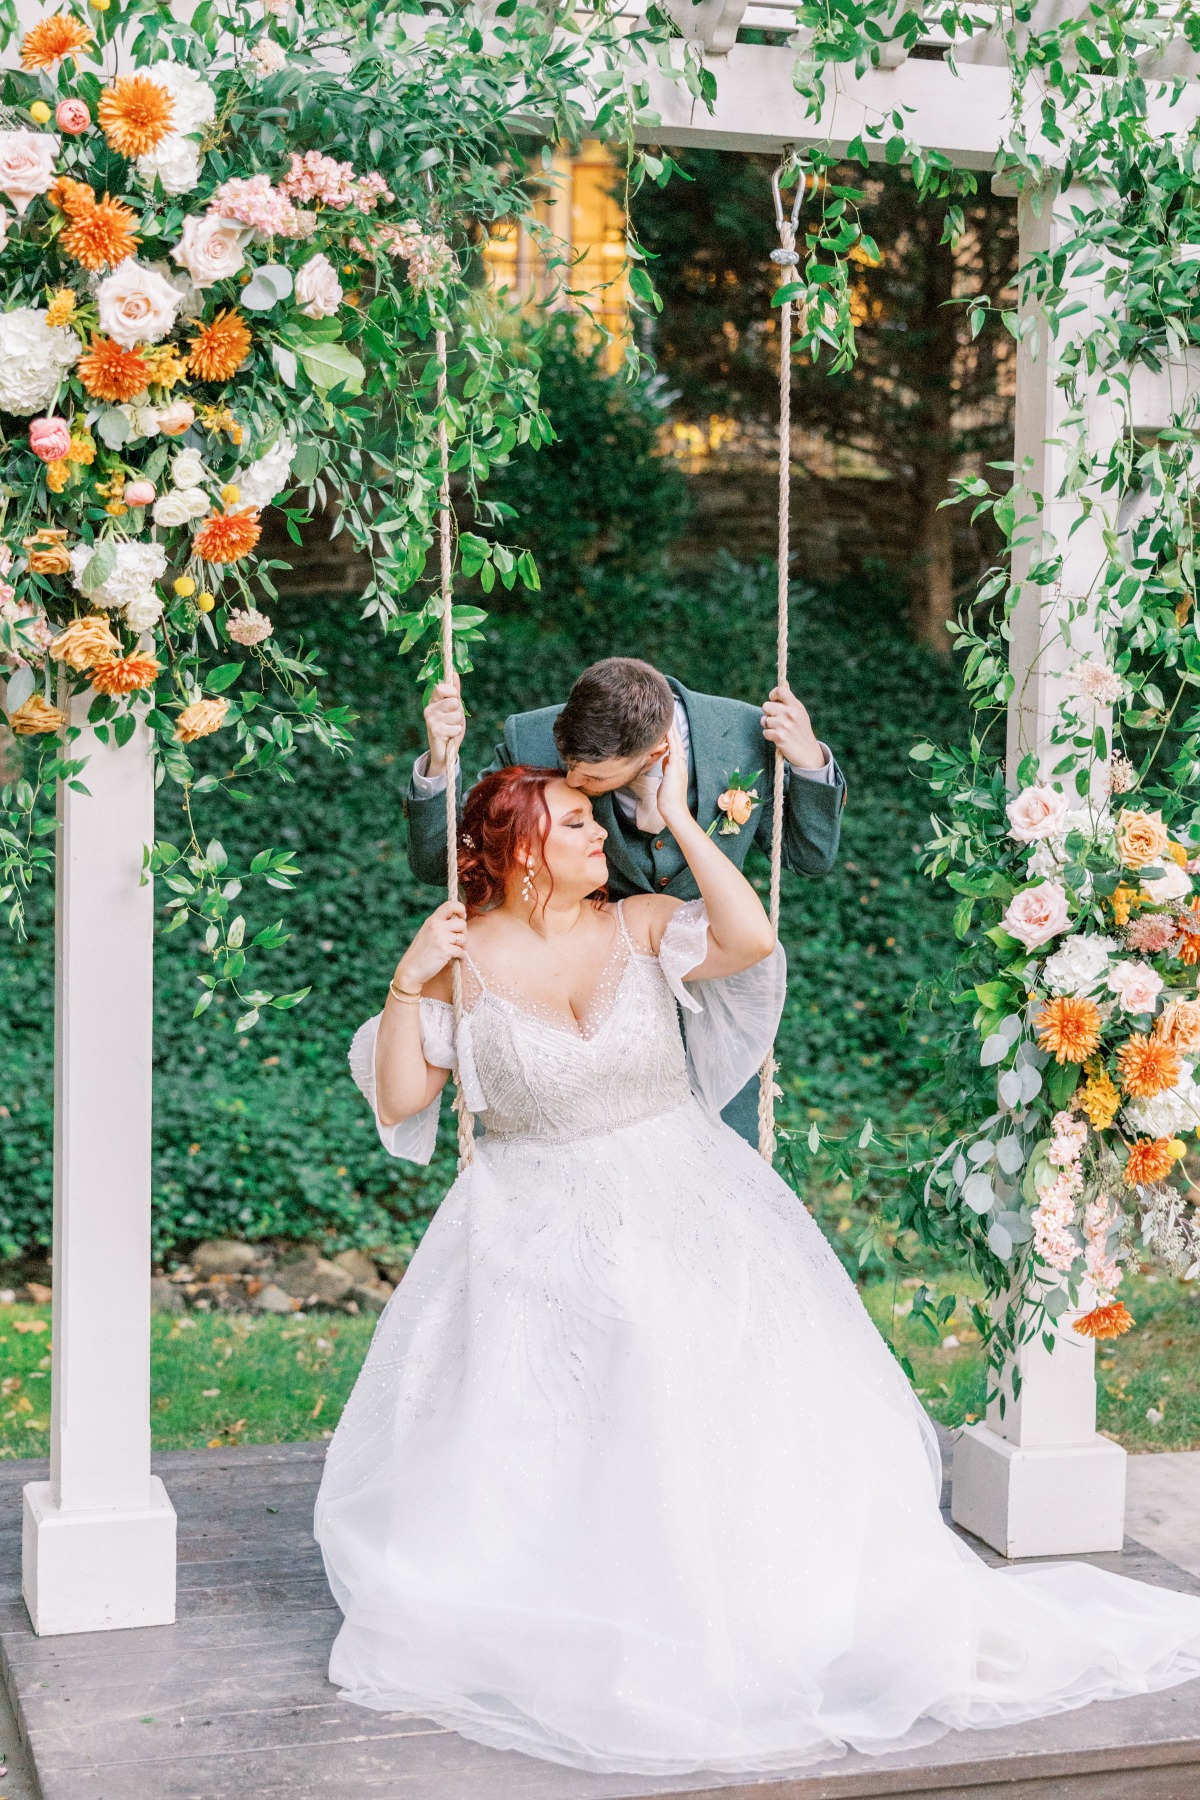 Vibrant and Artful Wedding From The Mind Of A Wedding Planner